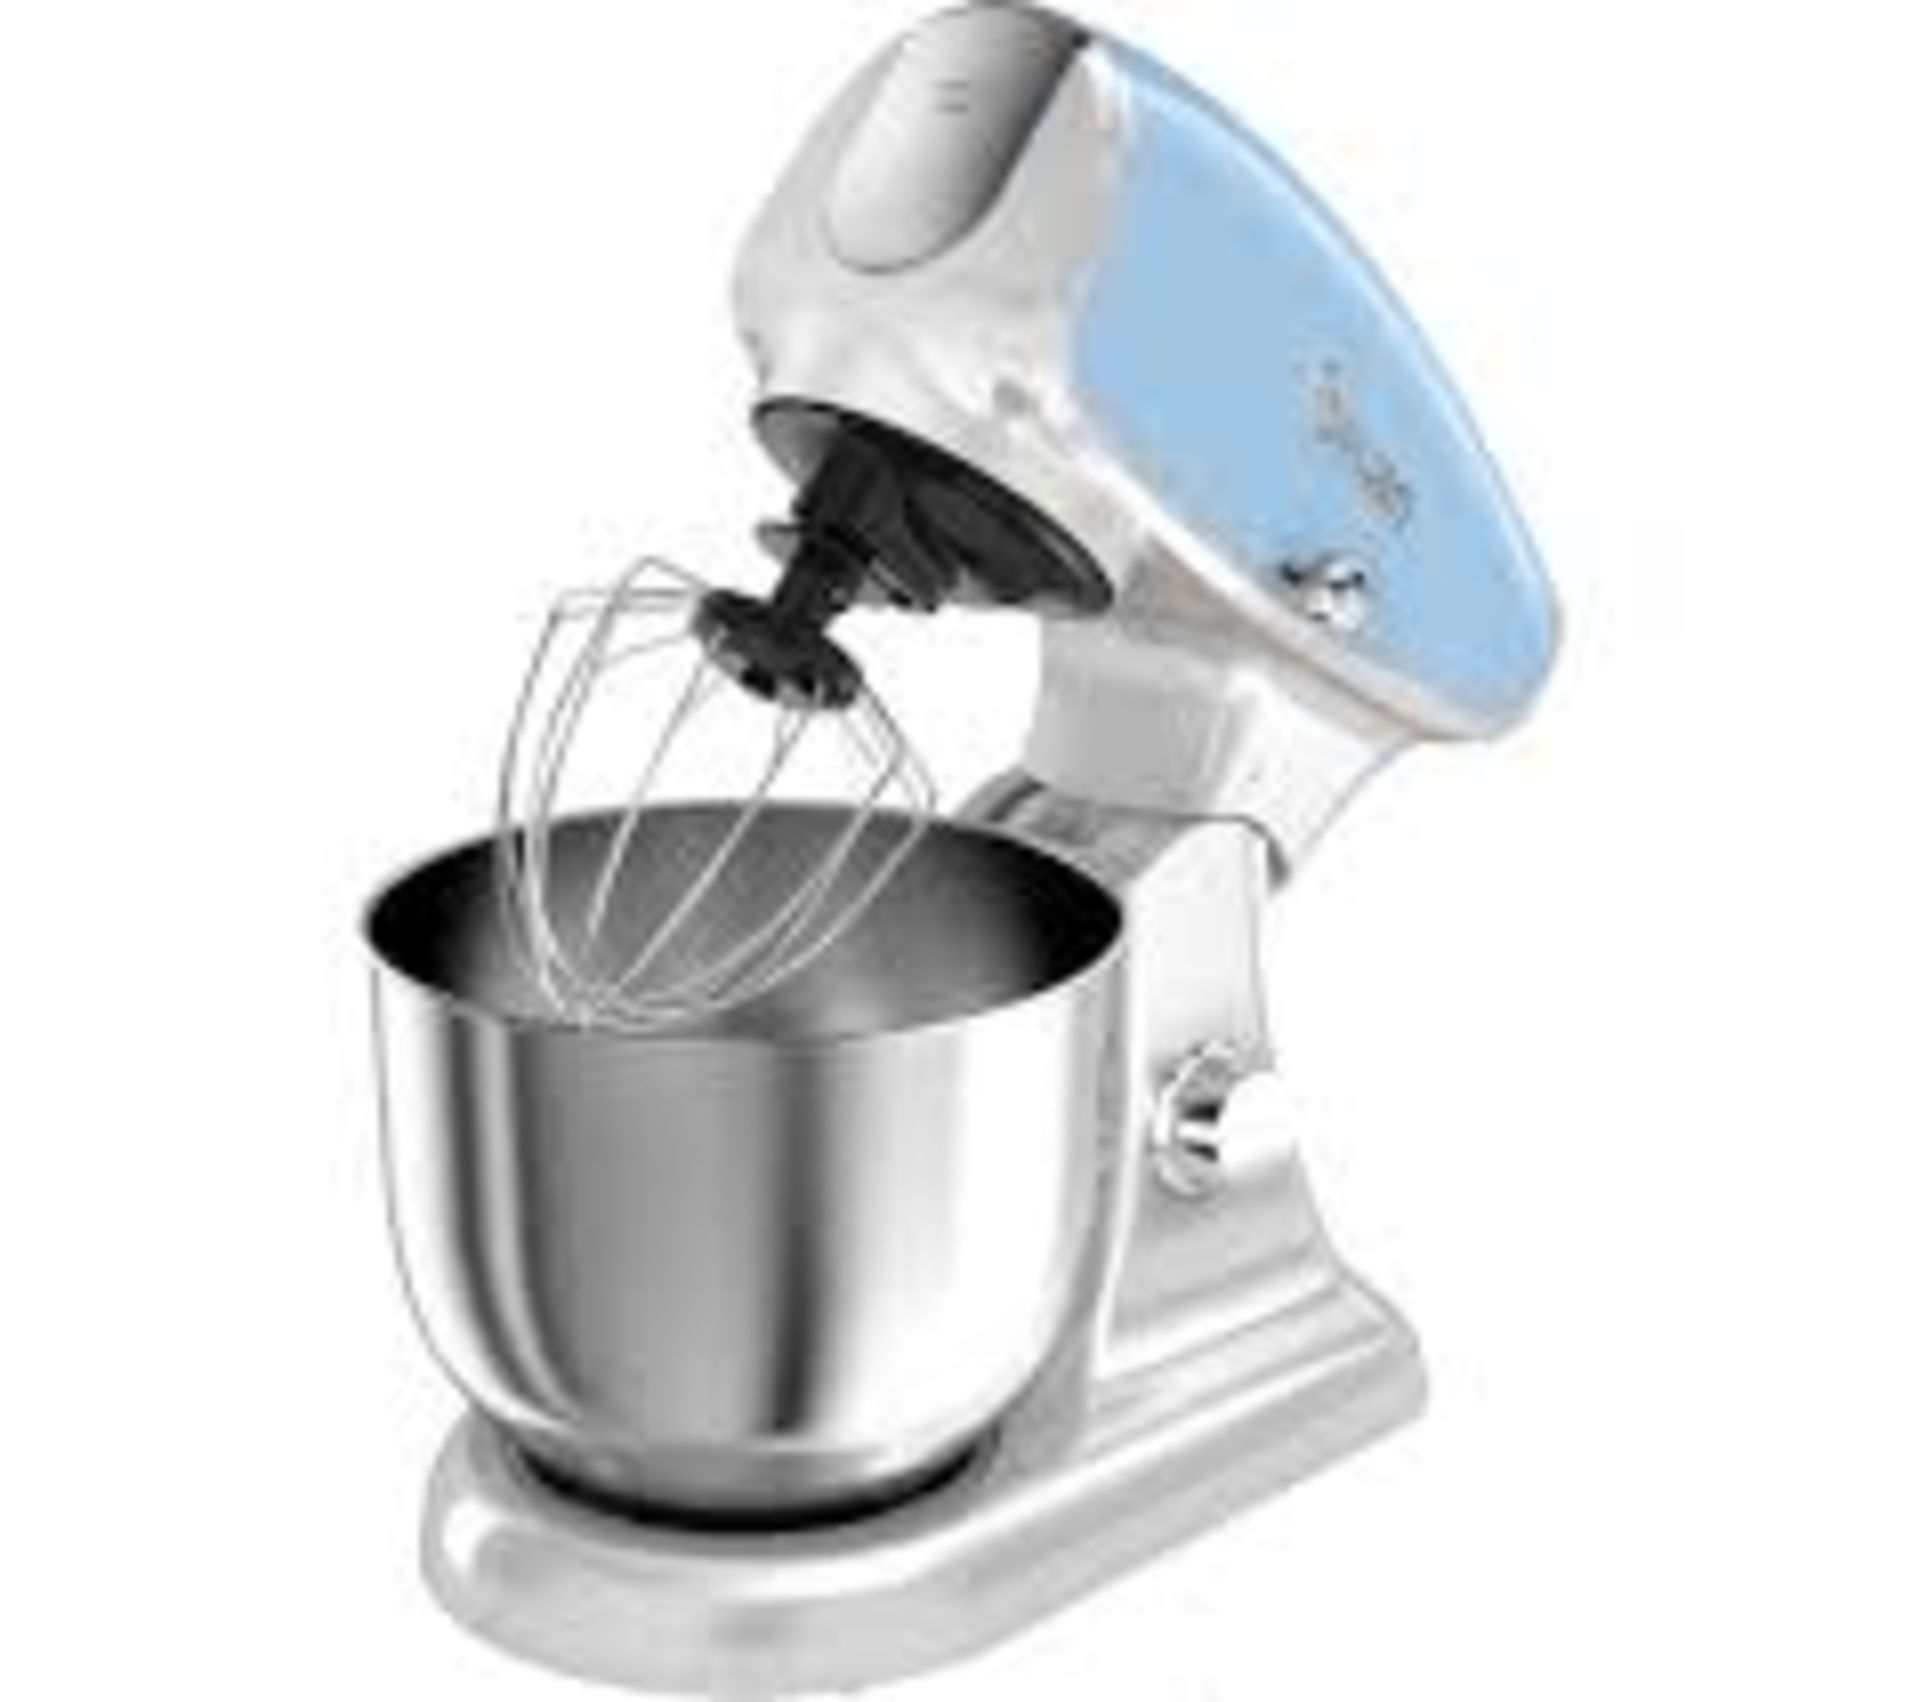 Boxed Swan retro 4.5ltr, Diecast Stand Mixer, RRP£145.00, (17298) (Public Viewing and Appraisals